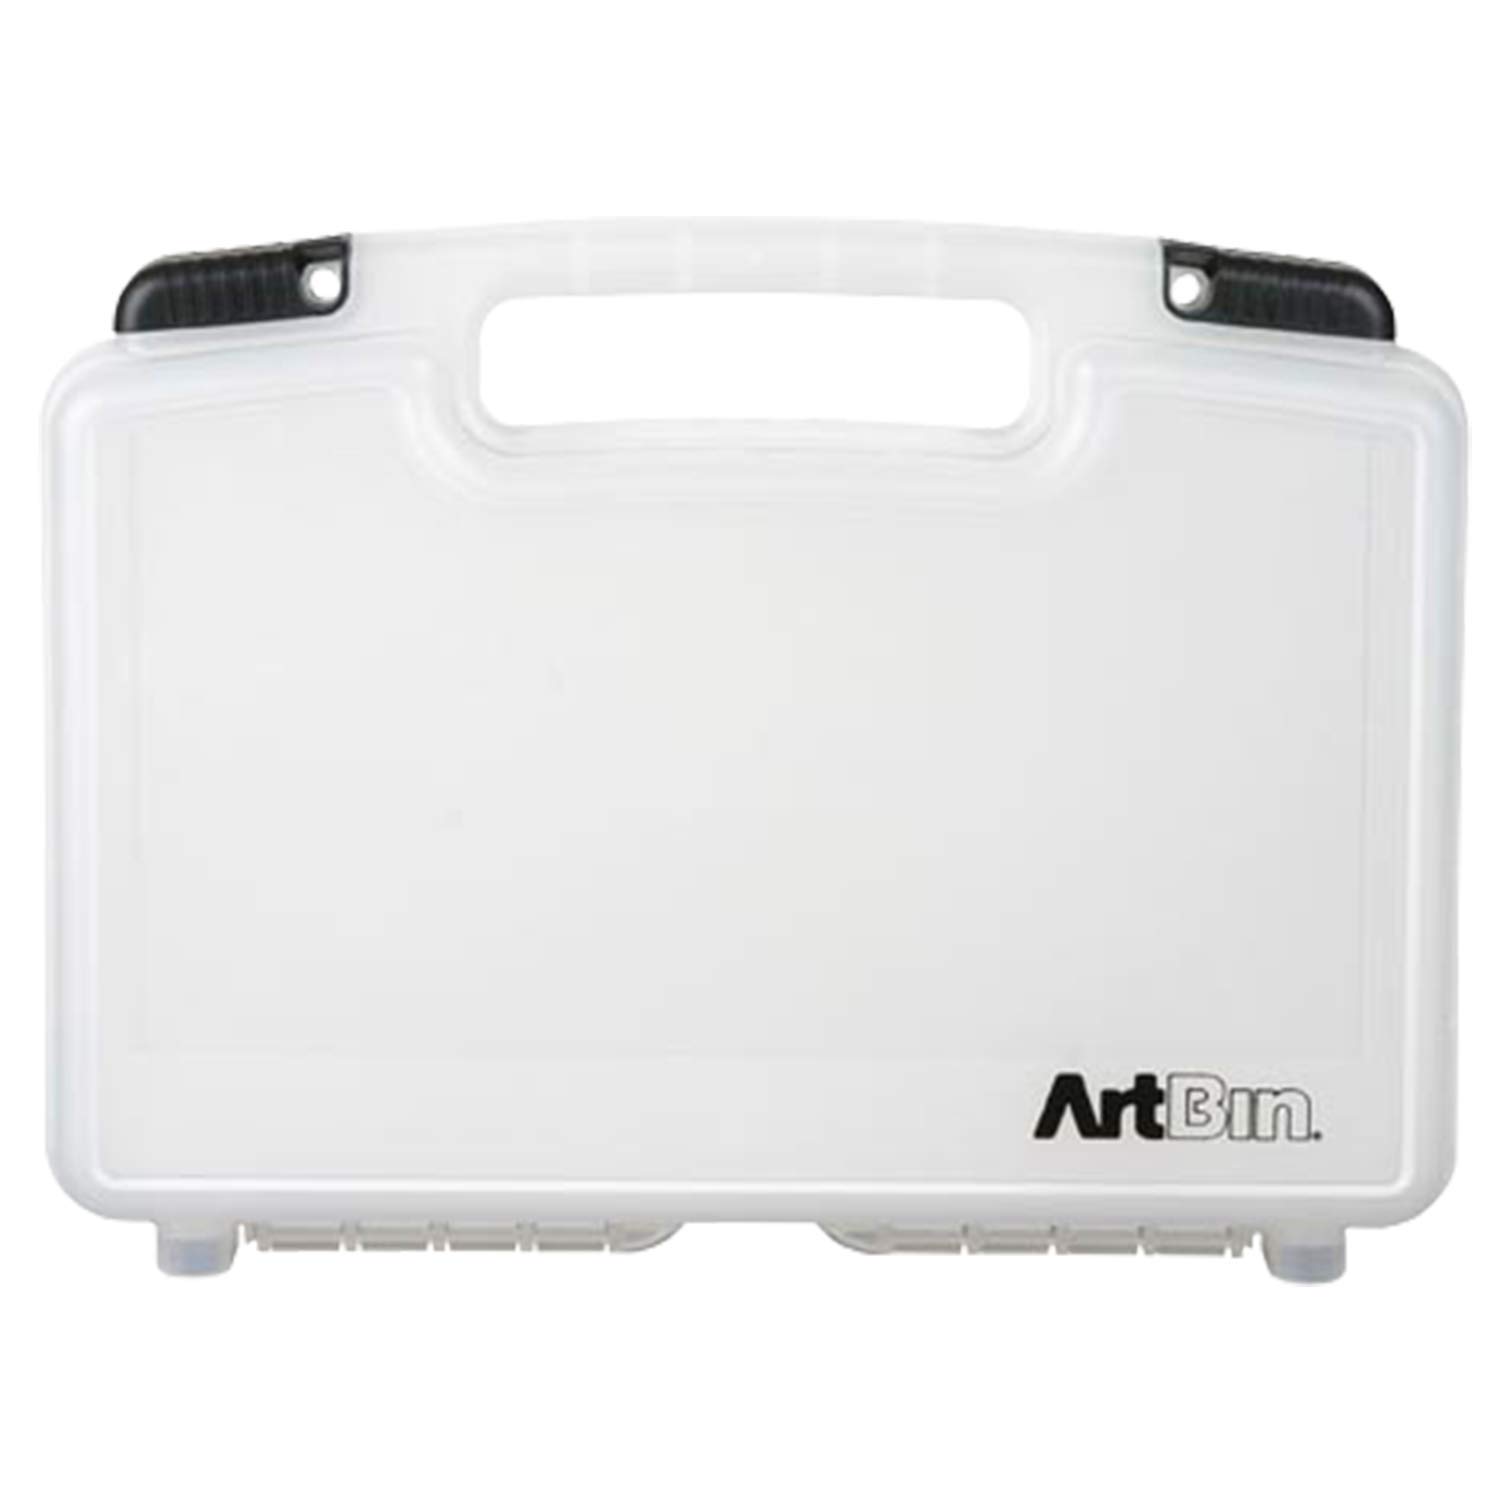 ArtBin 8014AB 14 Inch Quick View Carrying Case - 14 in. x 3.375 in. x 10.25 in., Lockable Art and Craft Supply Storage with Latches and Handles, Portable, Clear